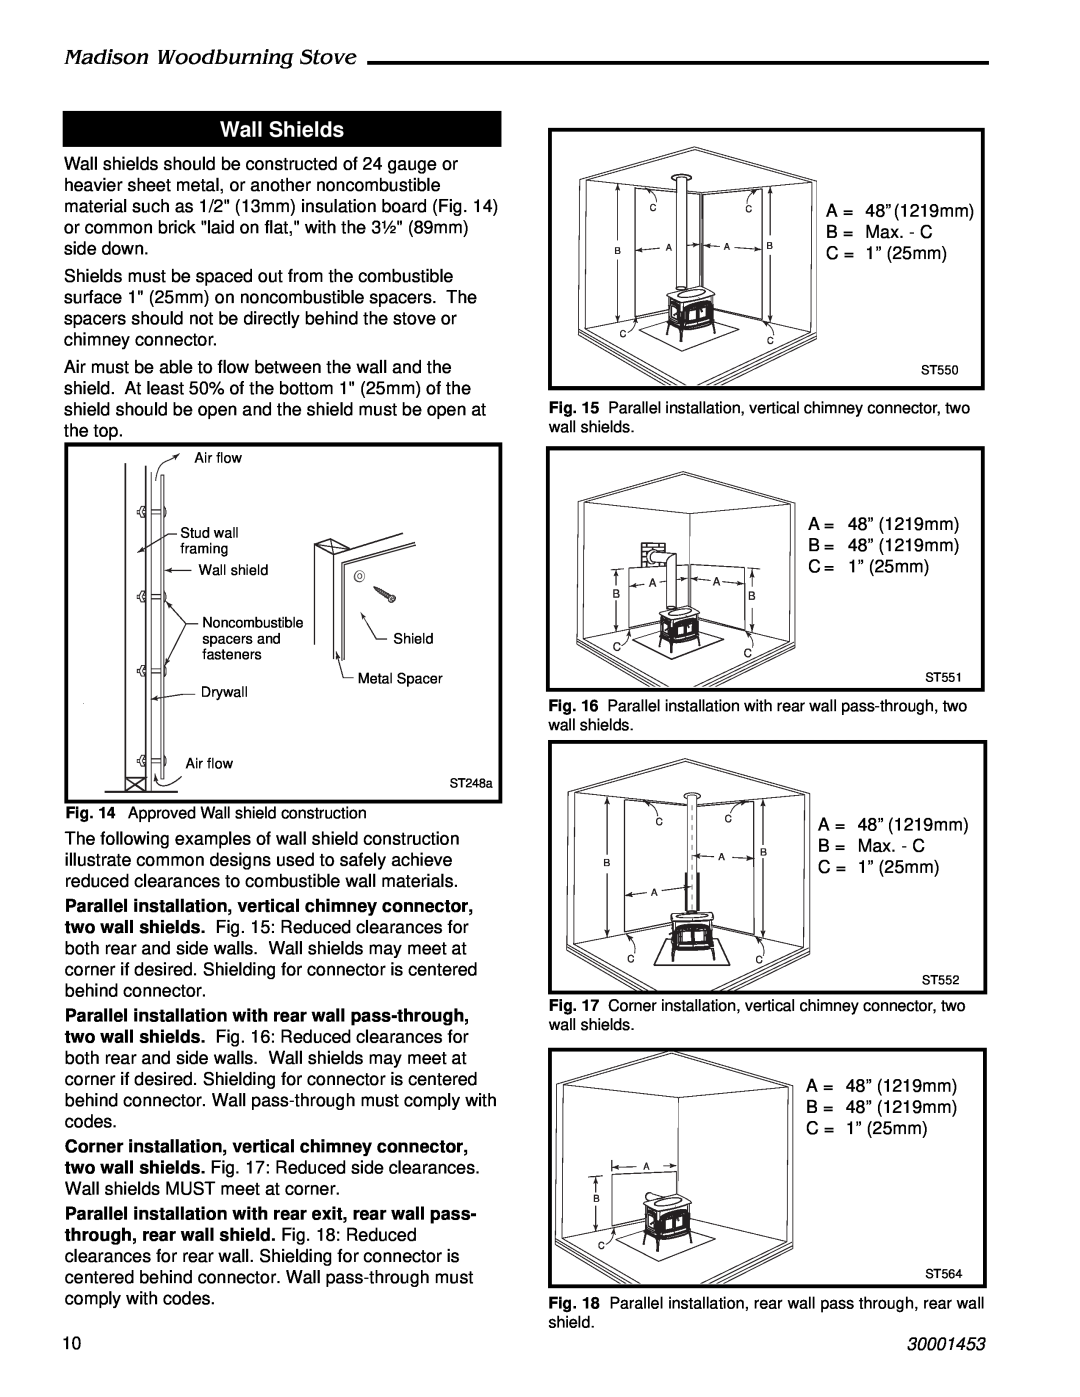 Vermont Casting 410 installation instructions Wall Shields, Madison Woodburning Stove, 30001453 